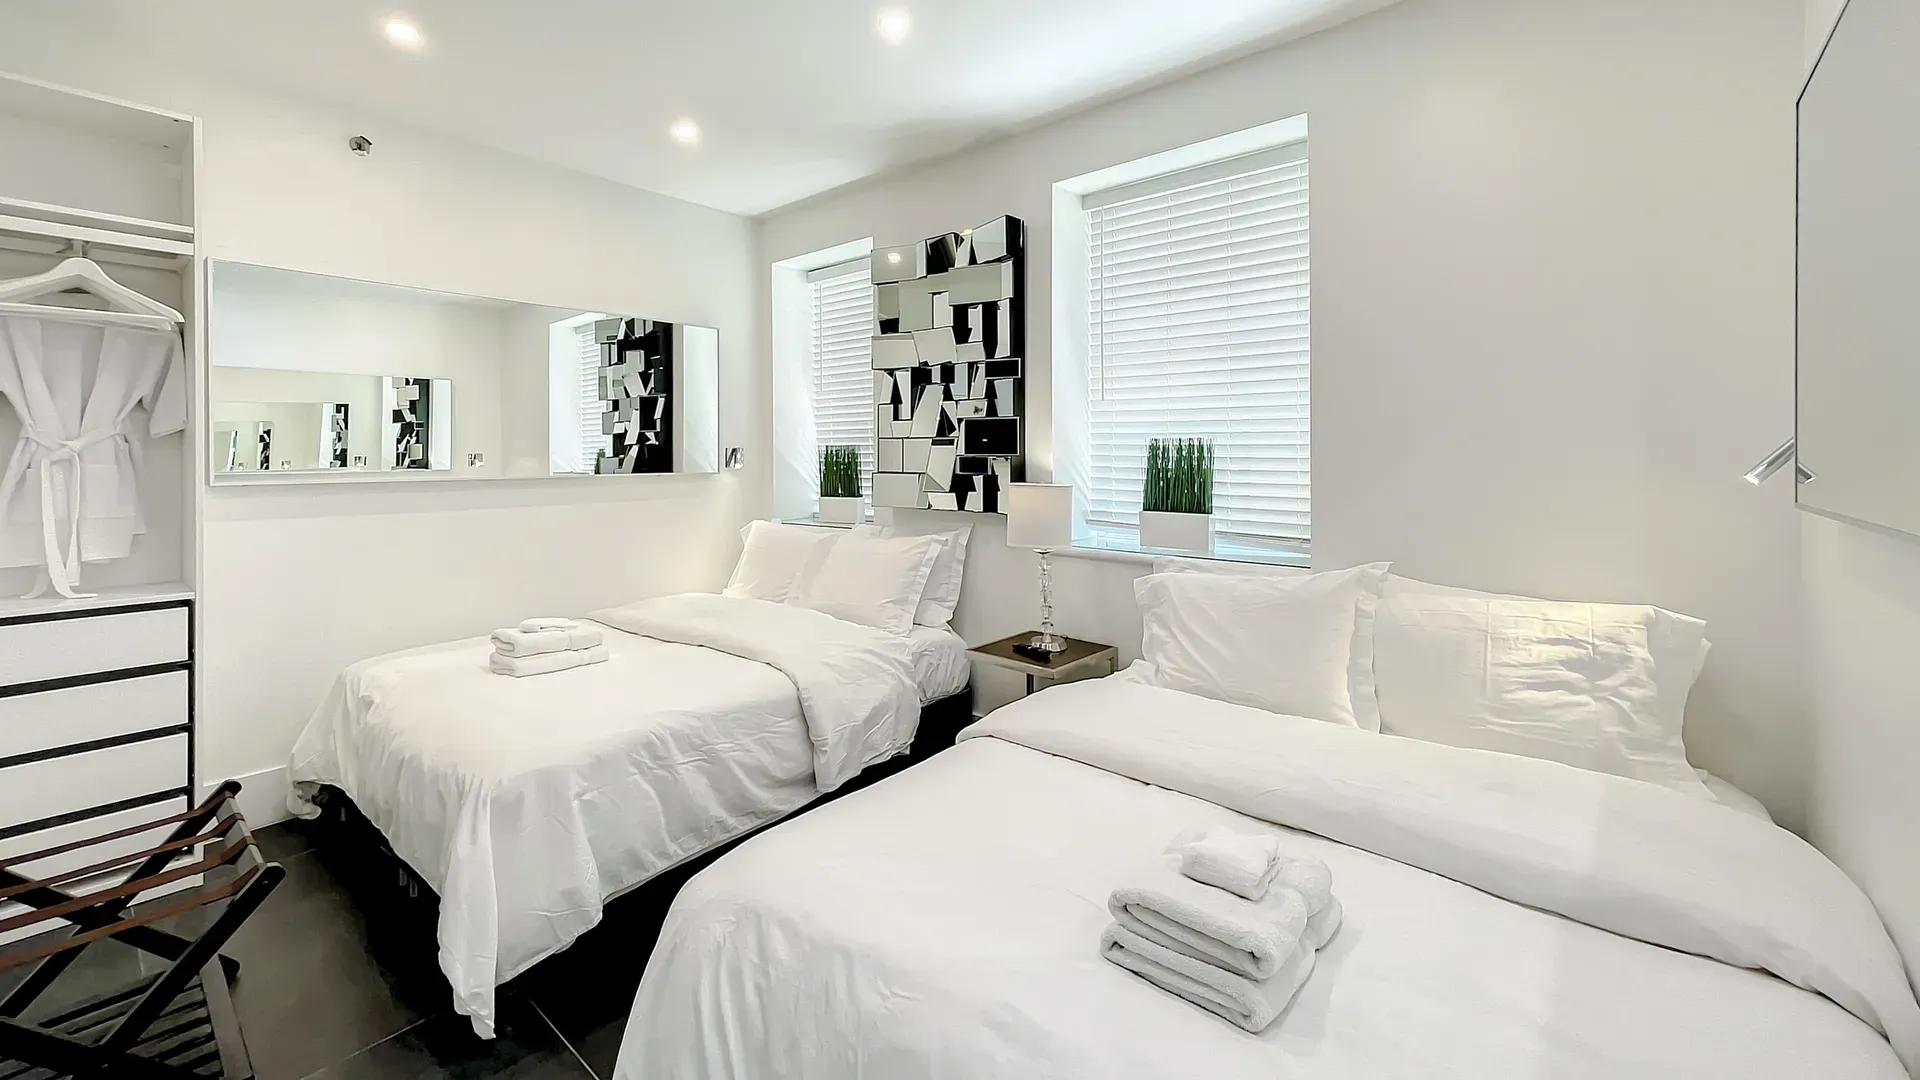 Bedrooms with comfortable memory foam mattresses, cozy dimmer lighting, USB chargers and Designer Mirrors